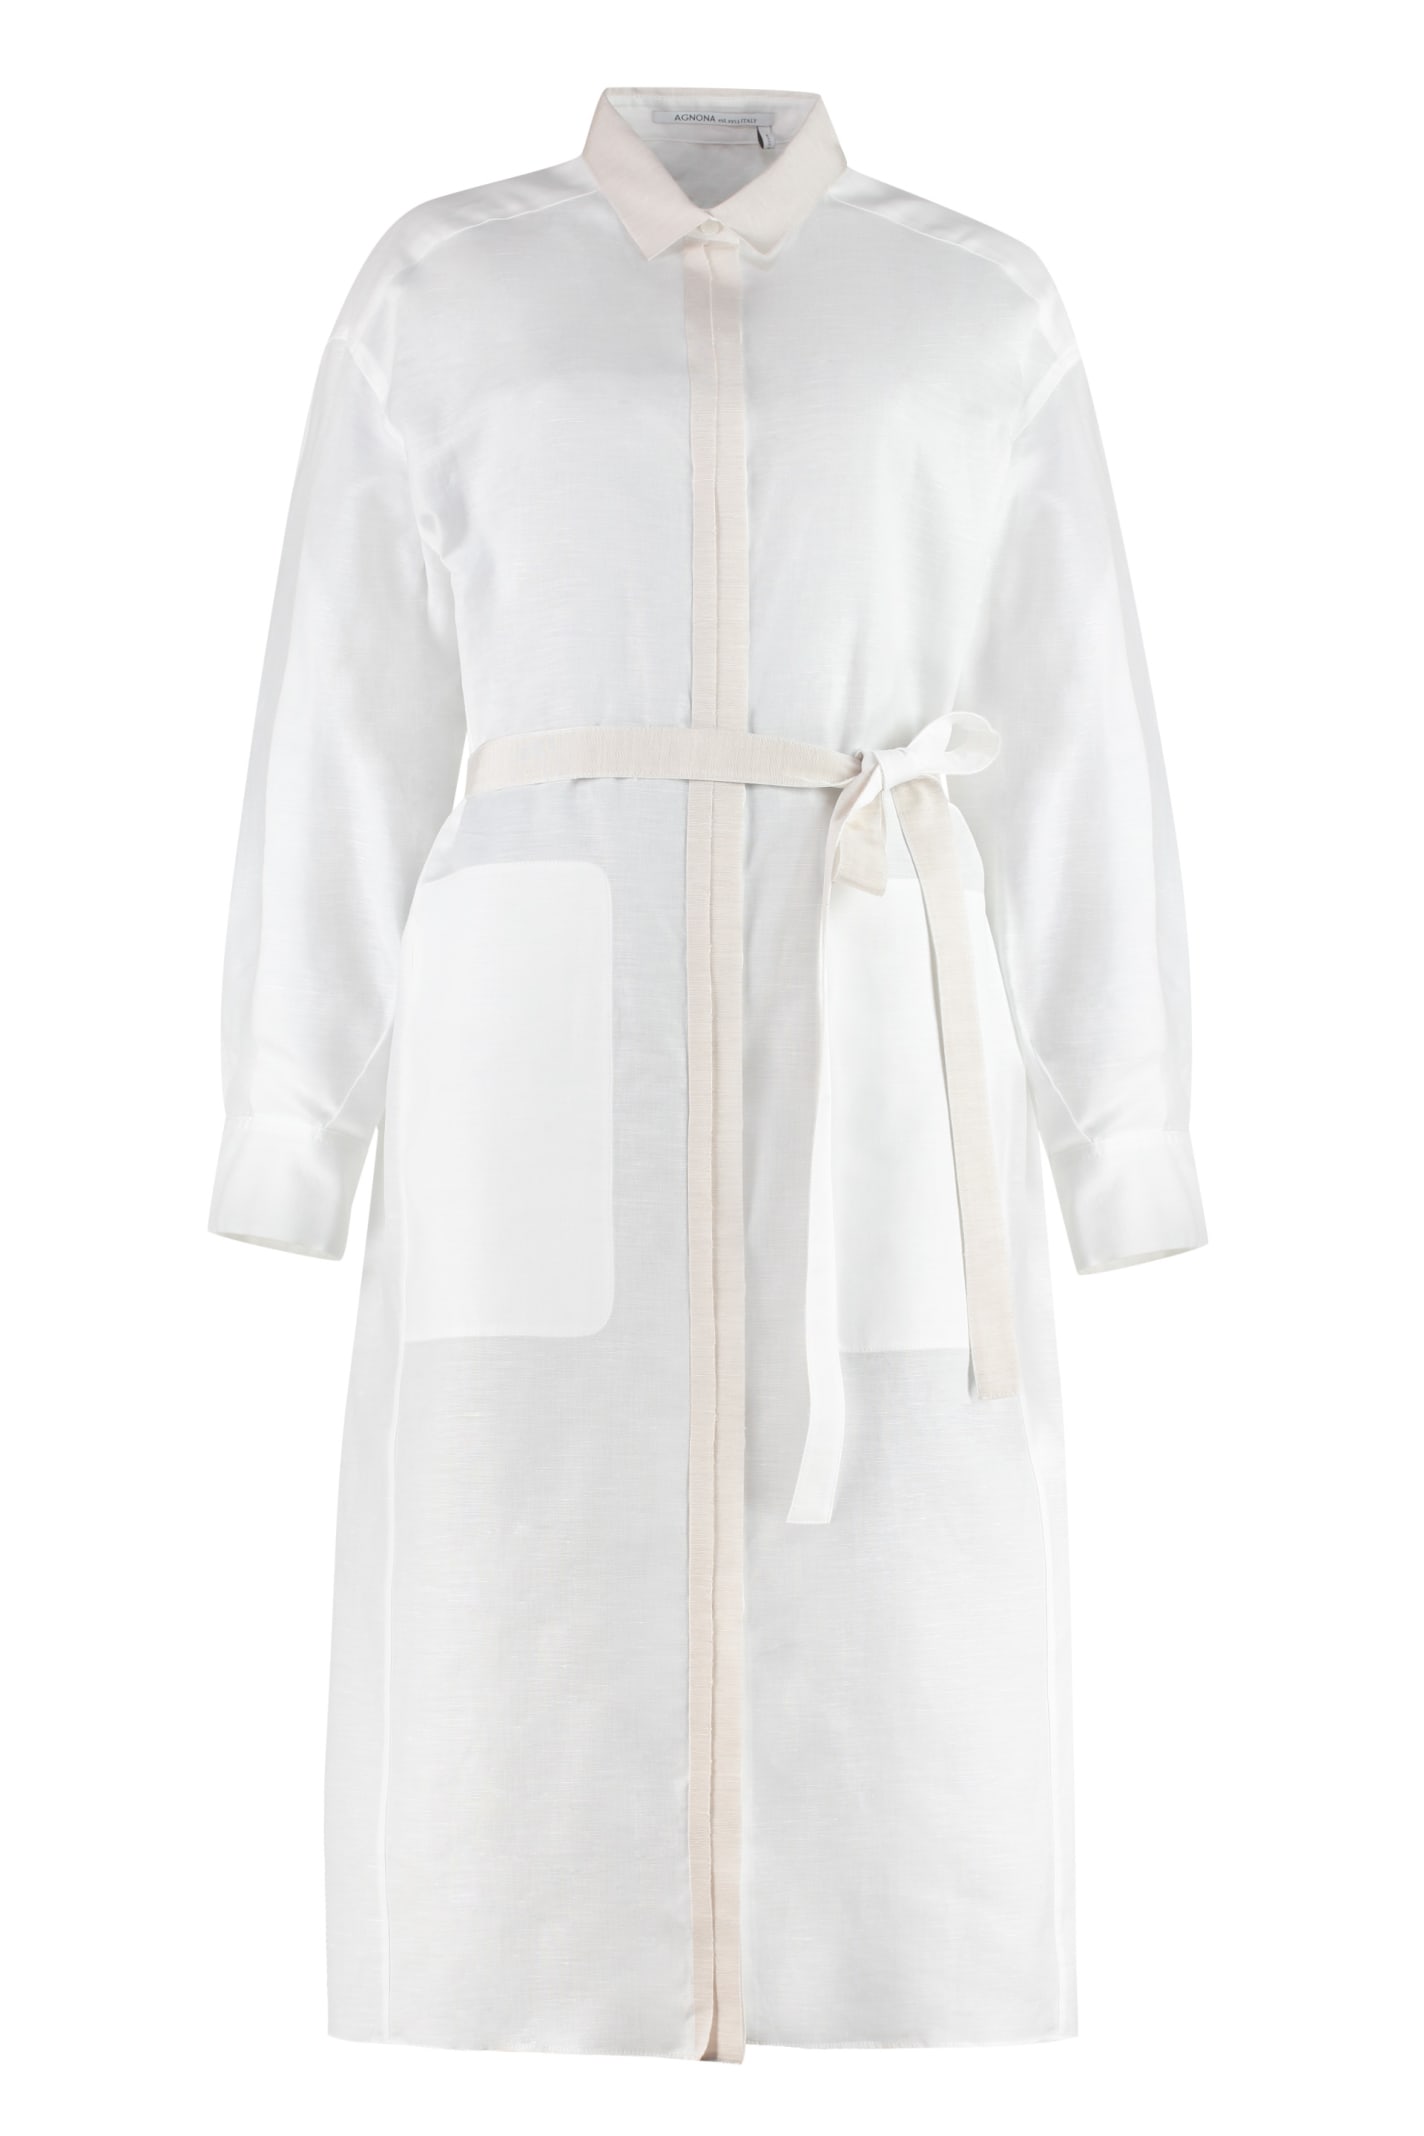 Agnona Belted Shirtdress In White